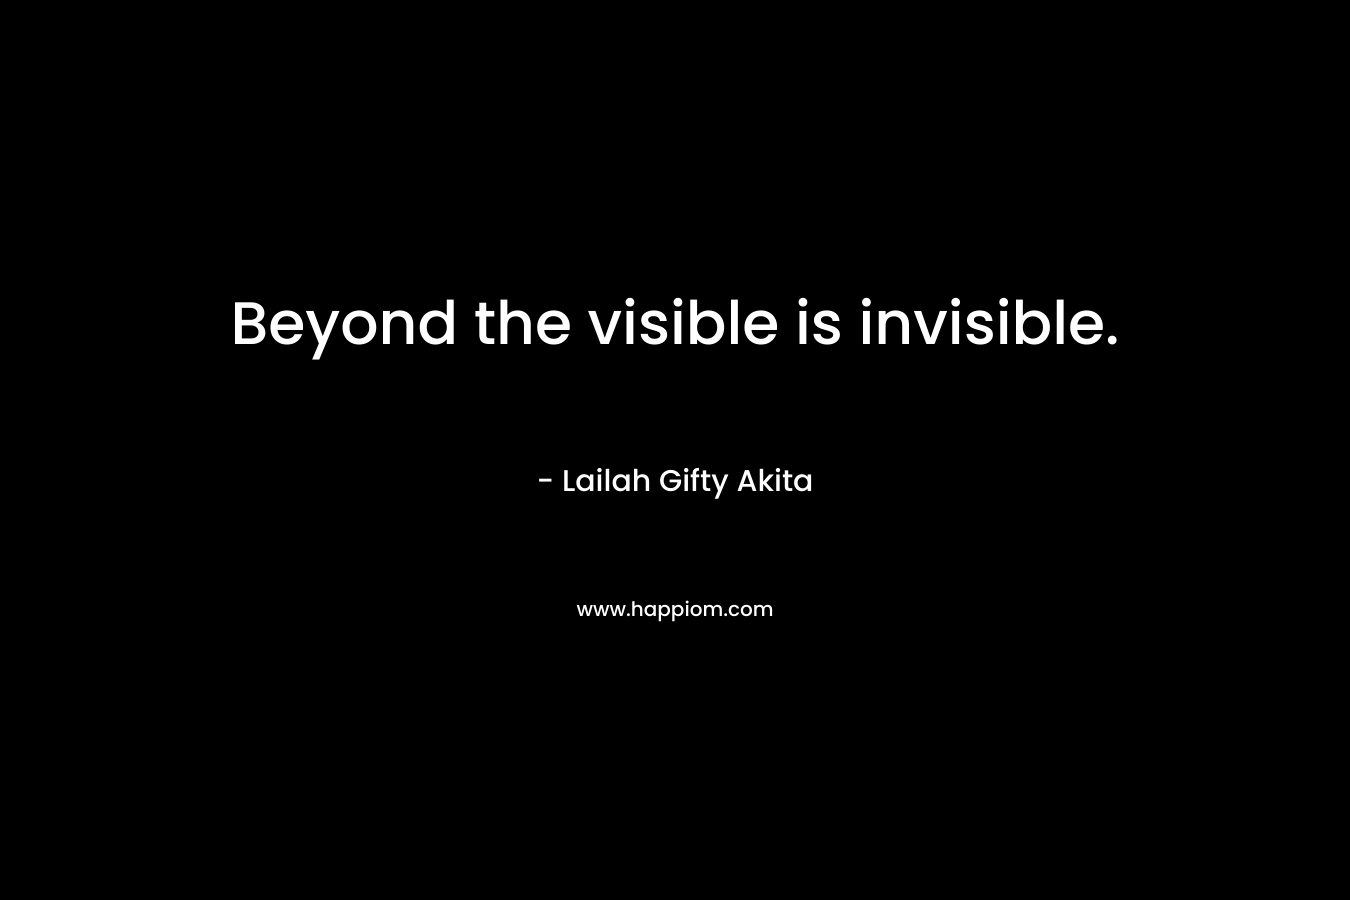 Beyond the visible is invisible.